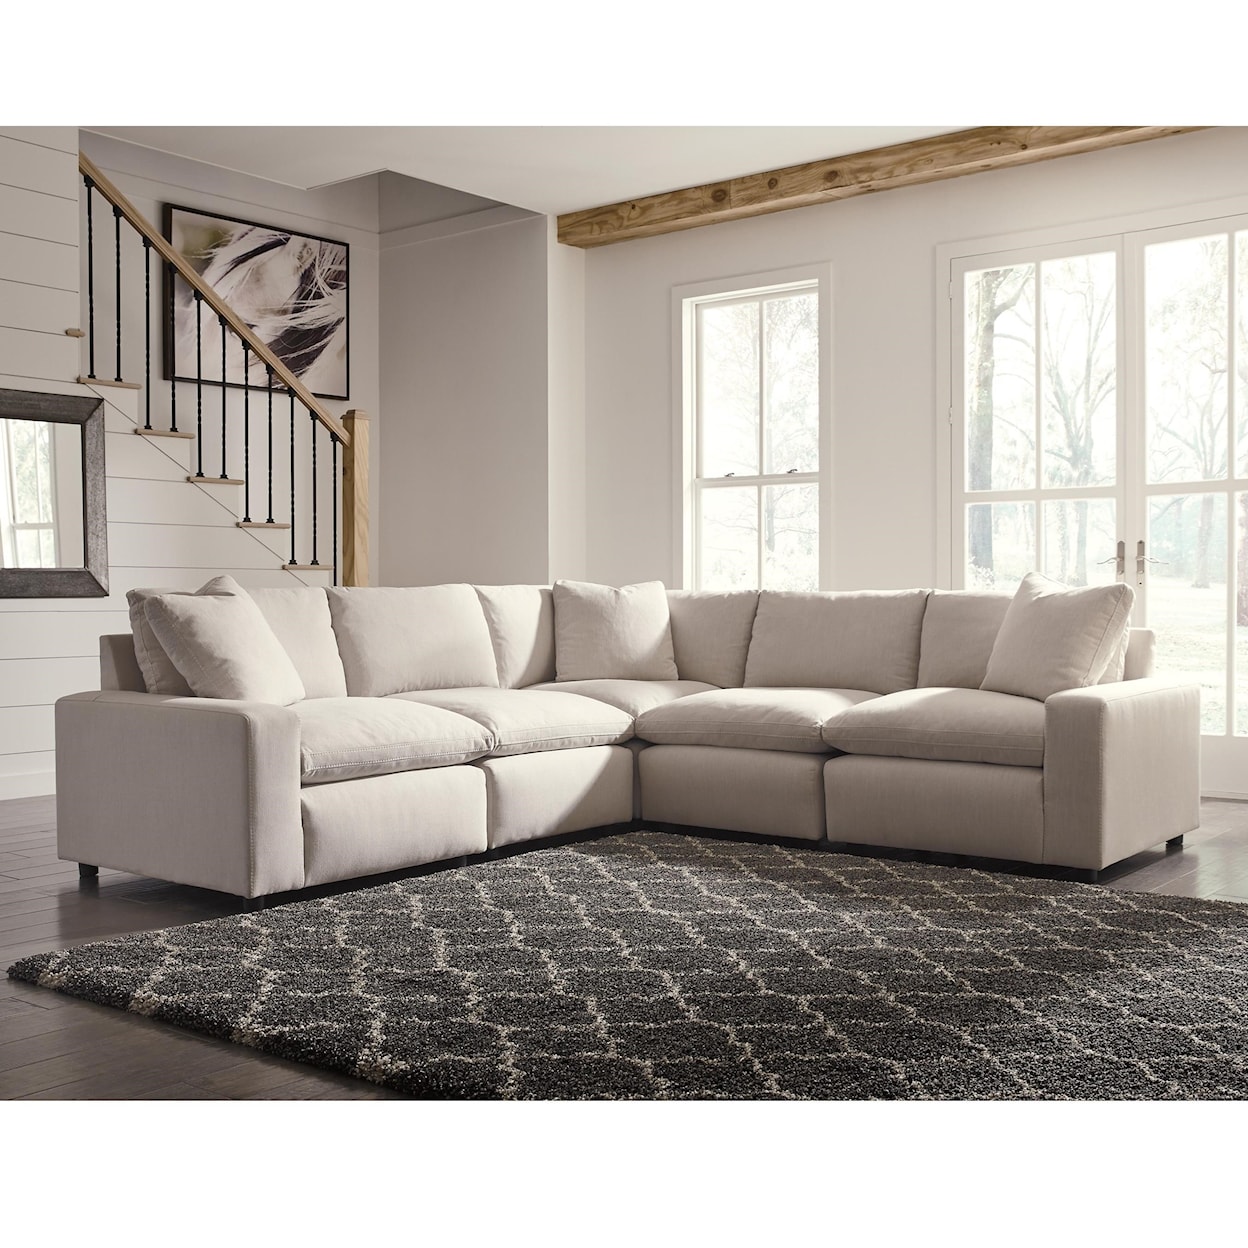 Signature Design by Ashley Savesto 5-Piece Sectional